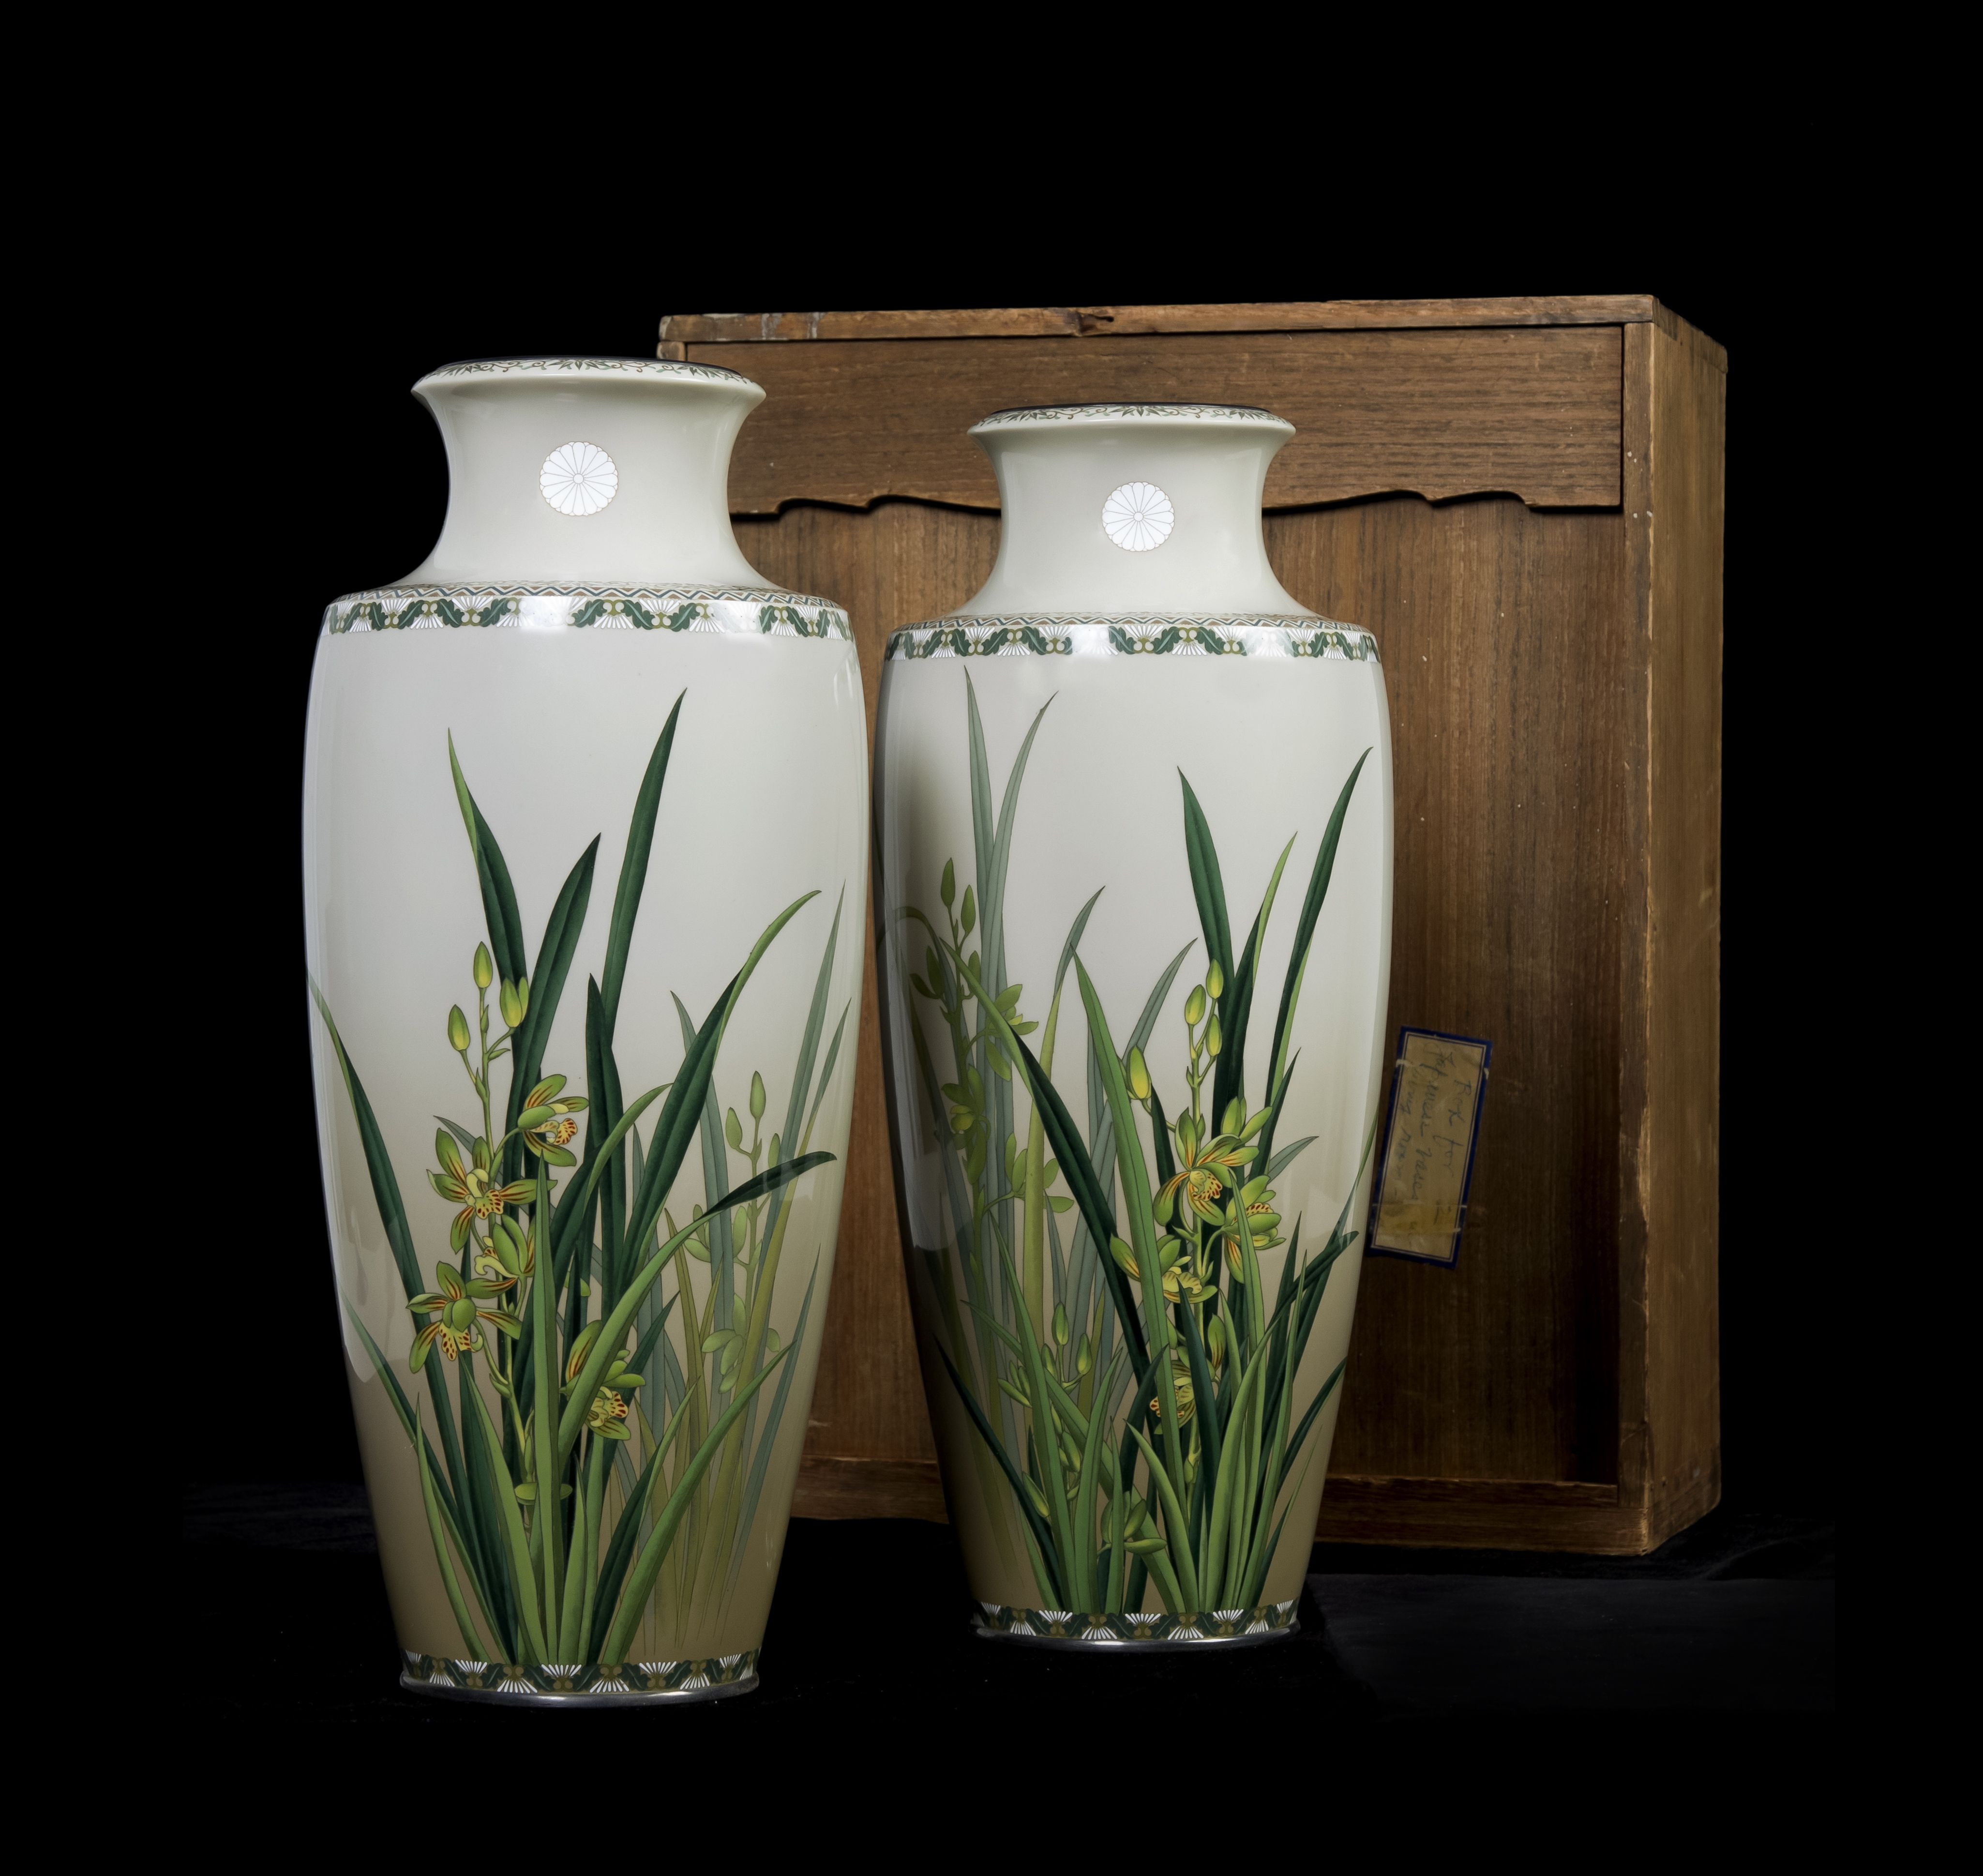 18 Best Japanese Glass Vase 2024 free download japanese glass vase of a pair of japanese cloisonna enamel imperial presentation vases inside a pair of japanese cloisonna enamel imperial presentation vases ando studio presented as a gift 